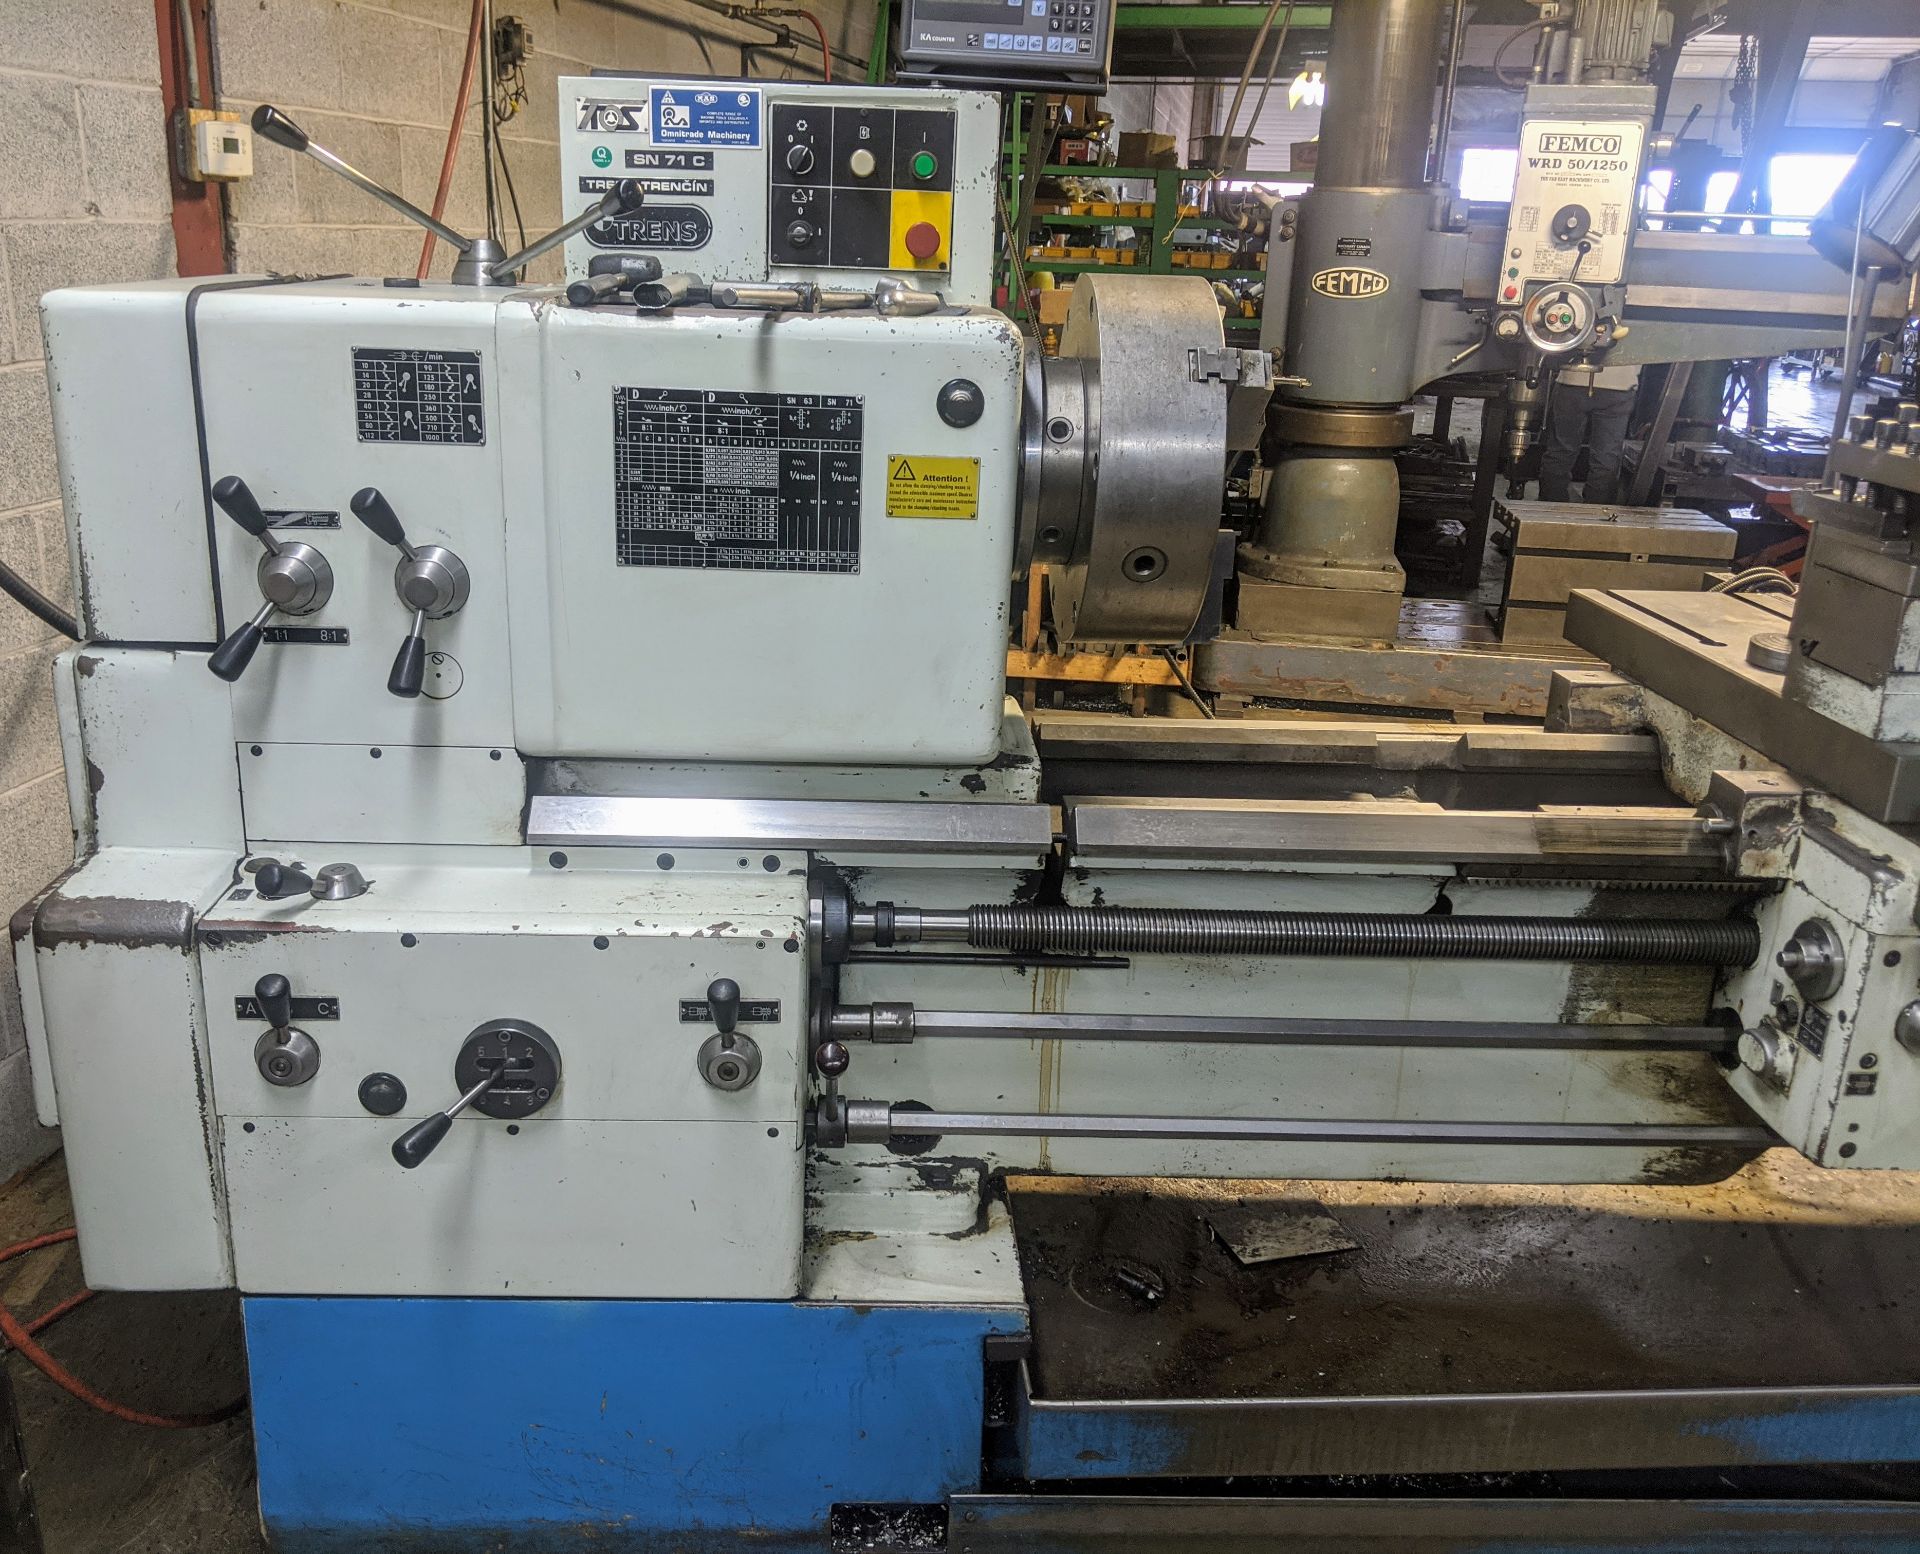 TOS SN71C Lathe, 28” x 120”, Mitutoyo 2-Axis DRO, 16” 3-Jaw Chuck, 3” Bore, Speeds to 1,000 RPM, - Image 9 of 15